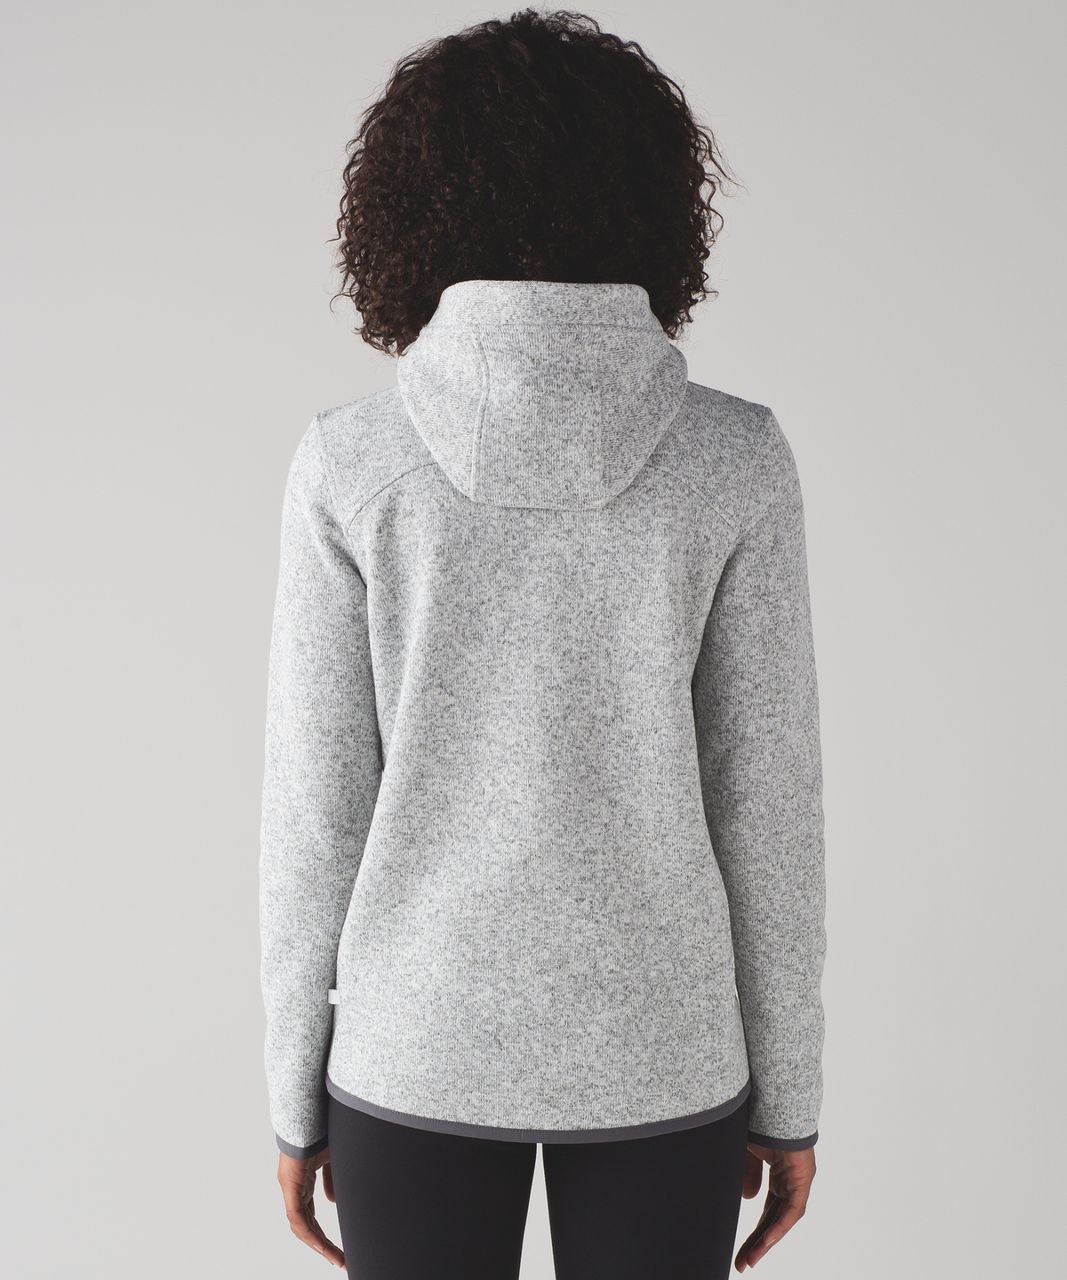 Lululemon Its Fleecing Cold Pullover - Heathered White / Dark Carbon